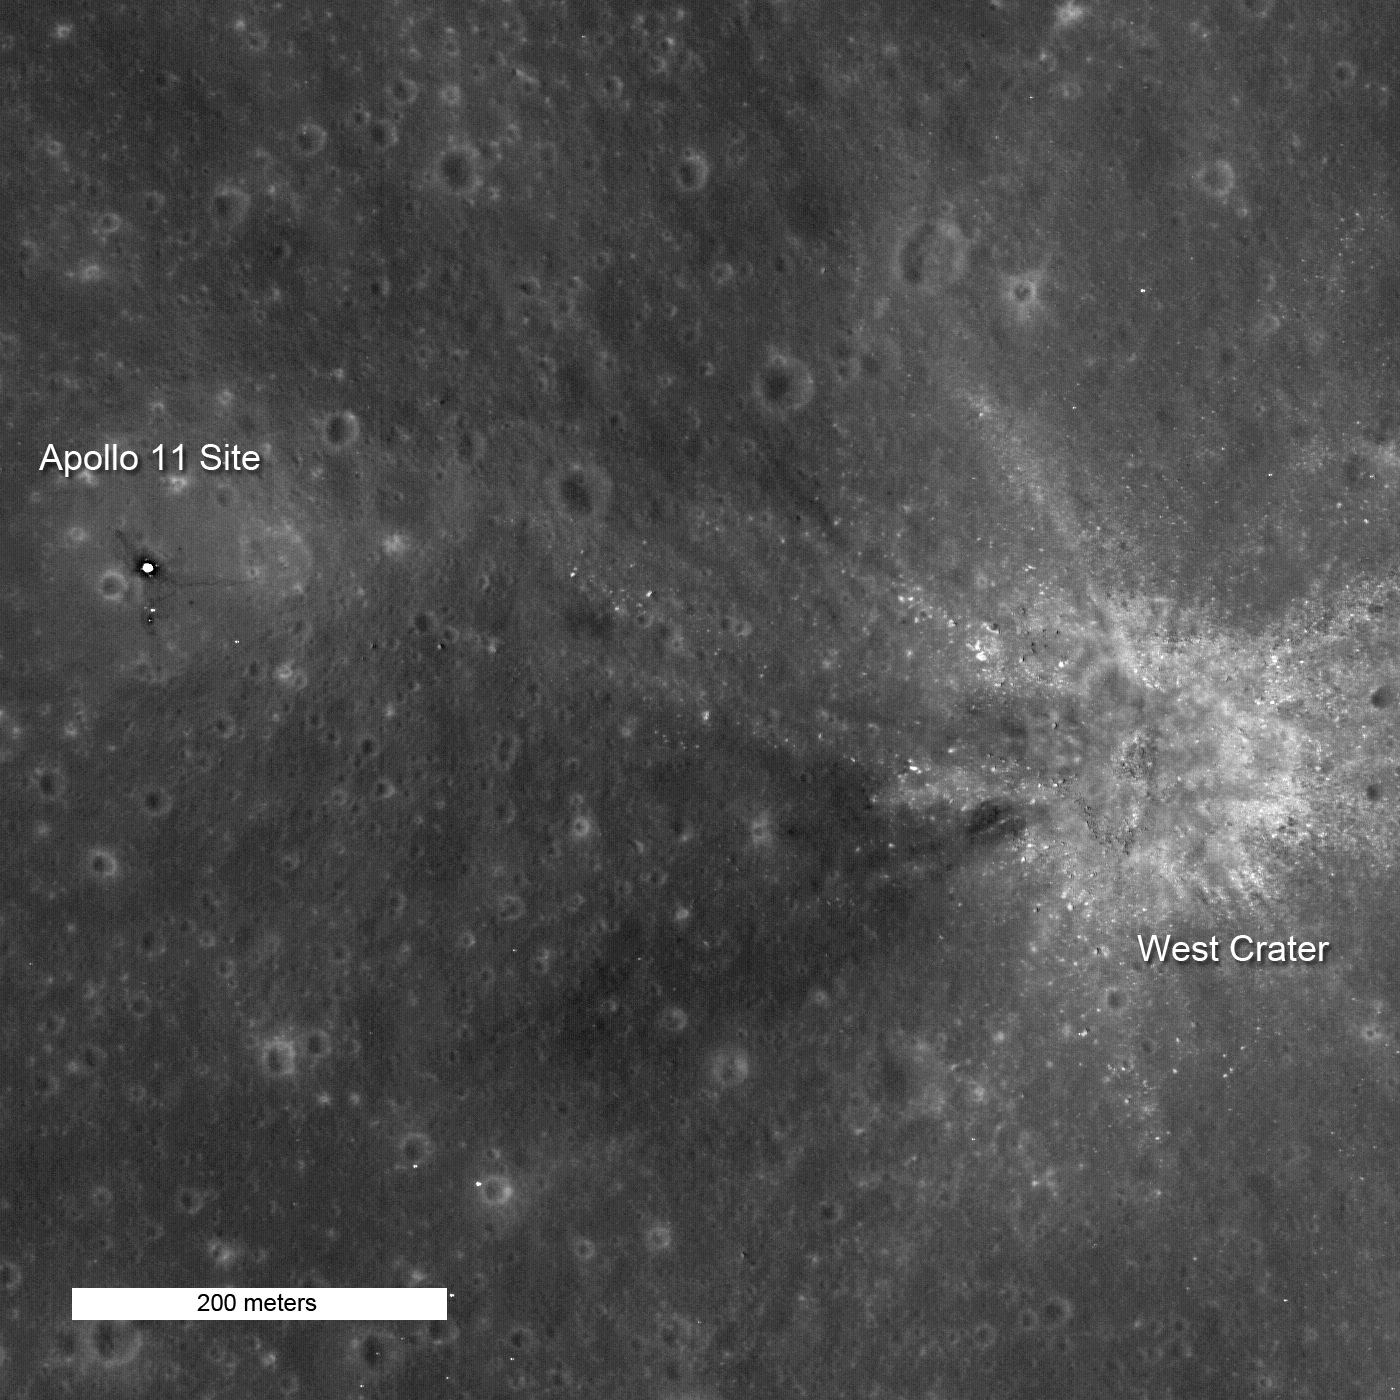 NASA's Lunar Reconnaissance Orbiter photographed the Apollo 11 lunar module and the rest of the mission's landing site in 2009.